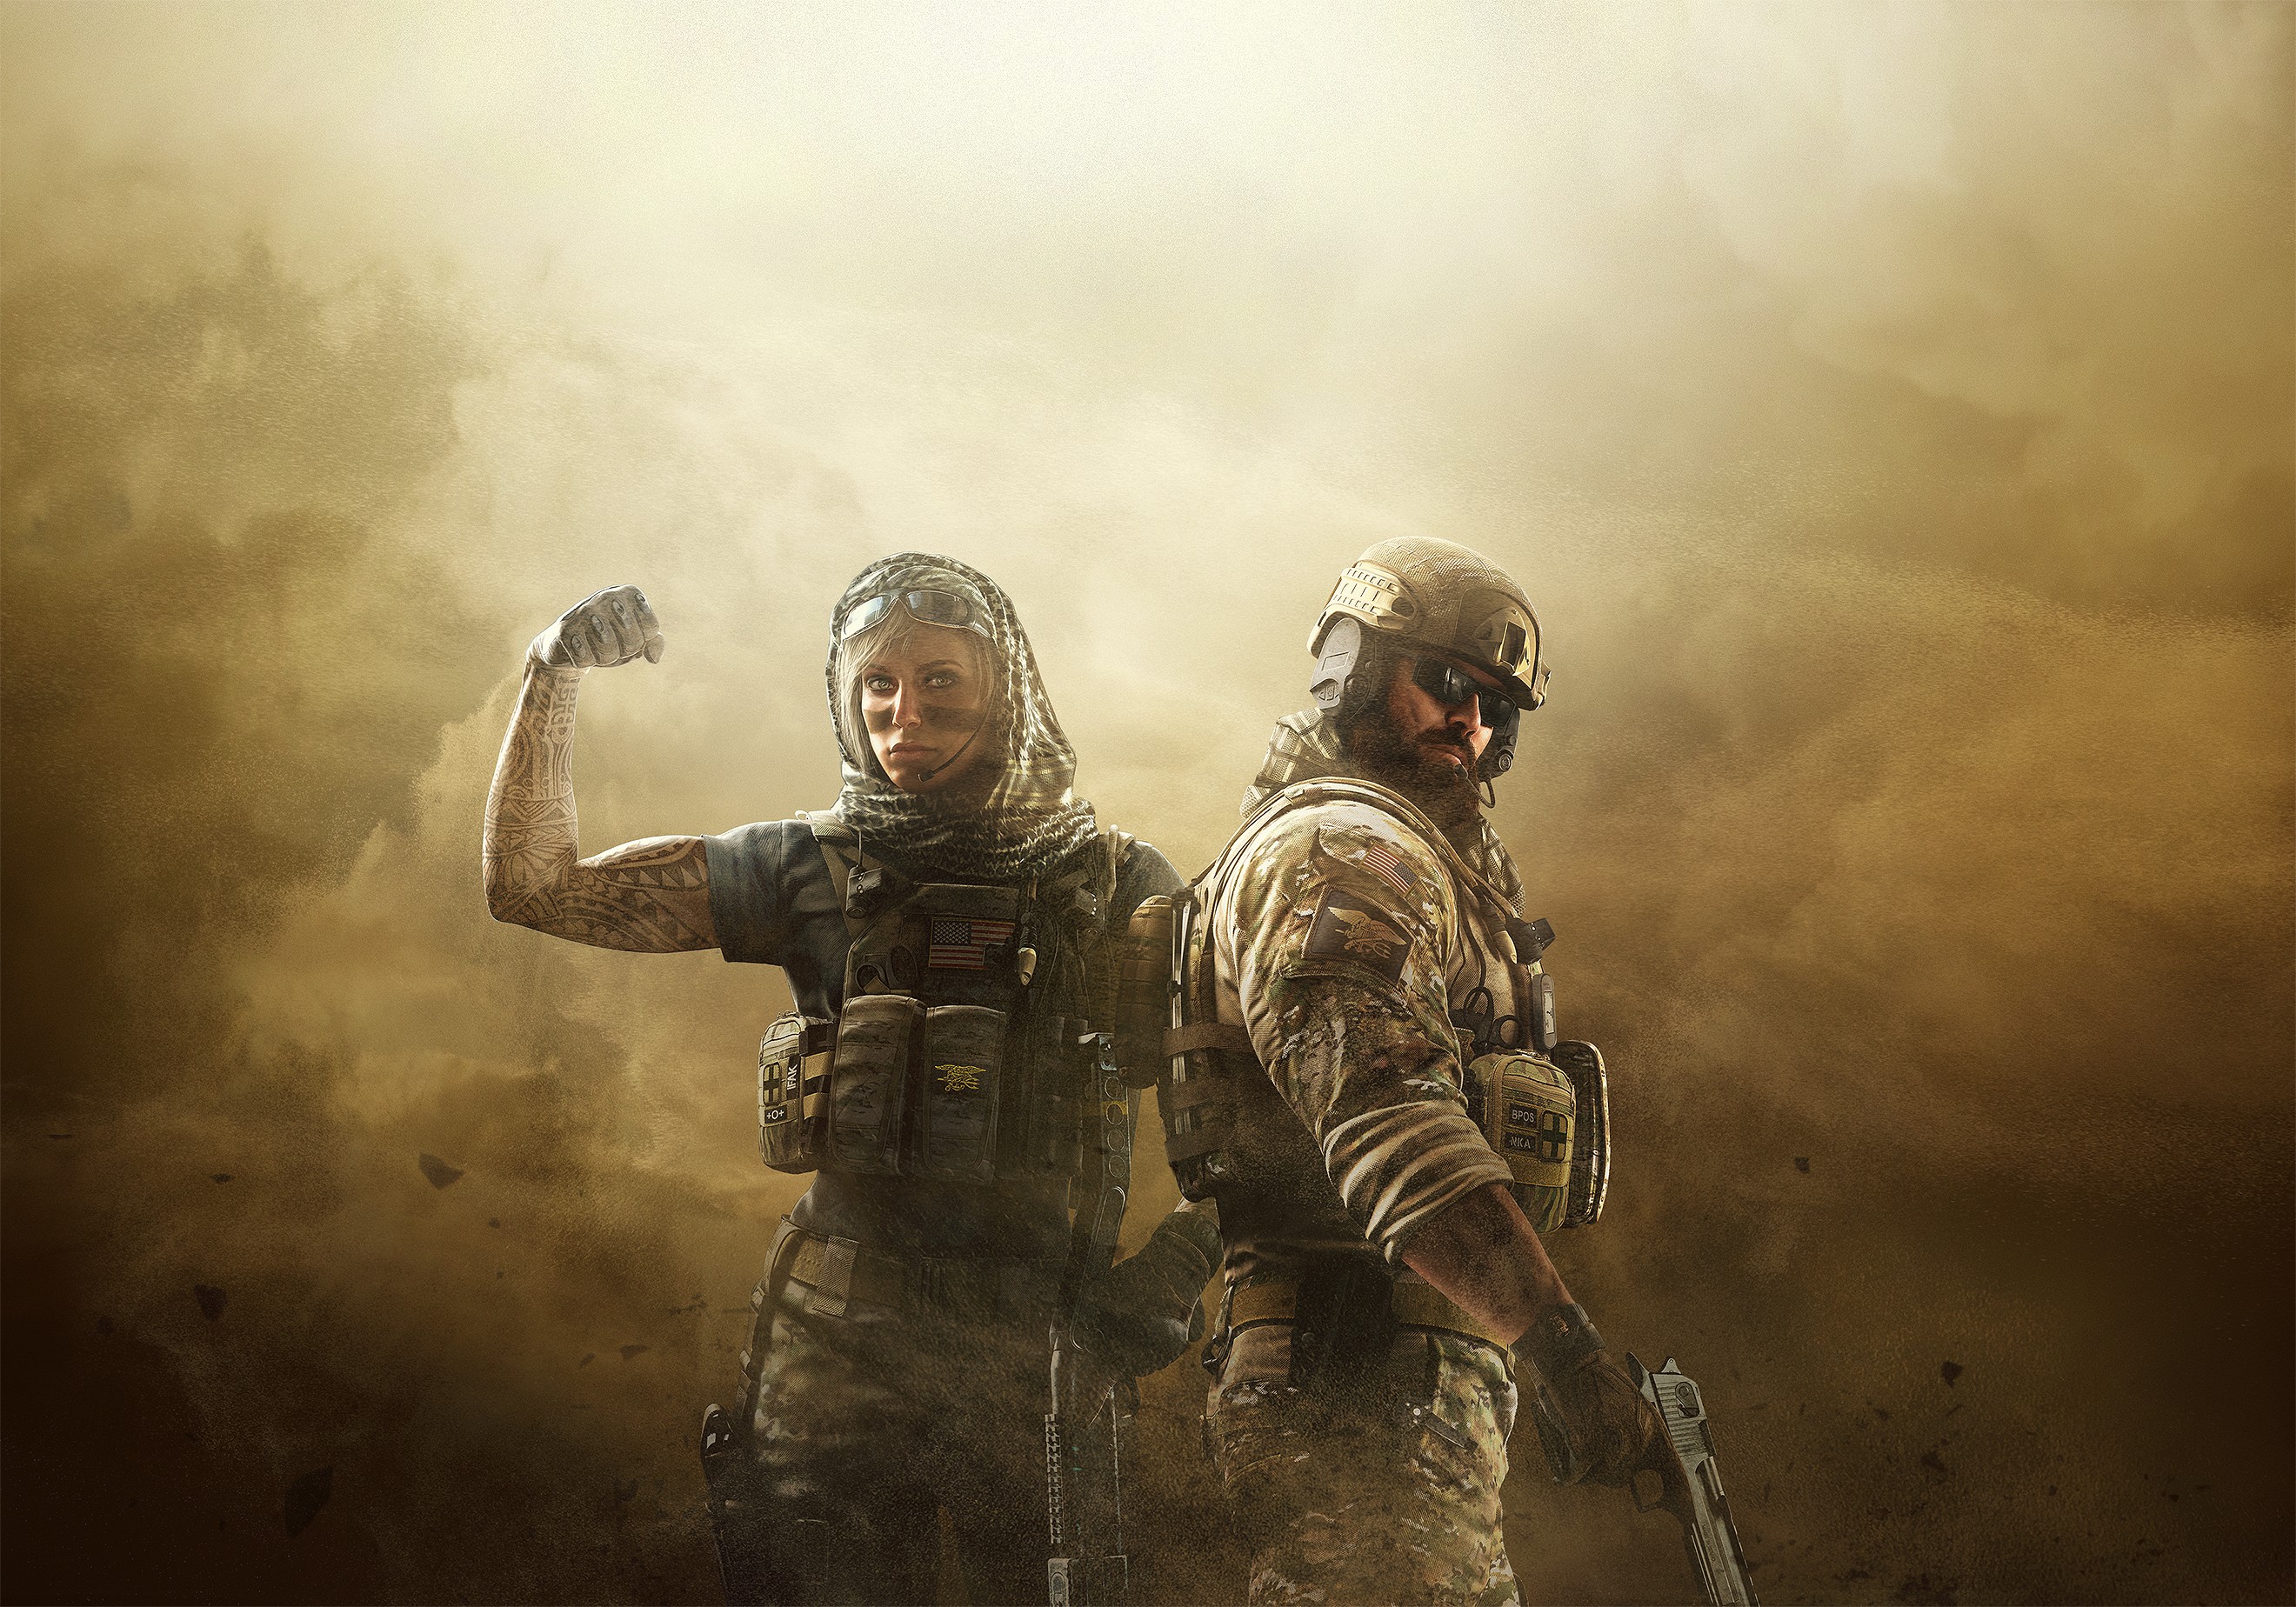 Wallpapers Tom Clancys Rainbow Six Siege Games Xbox Games on the desktop